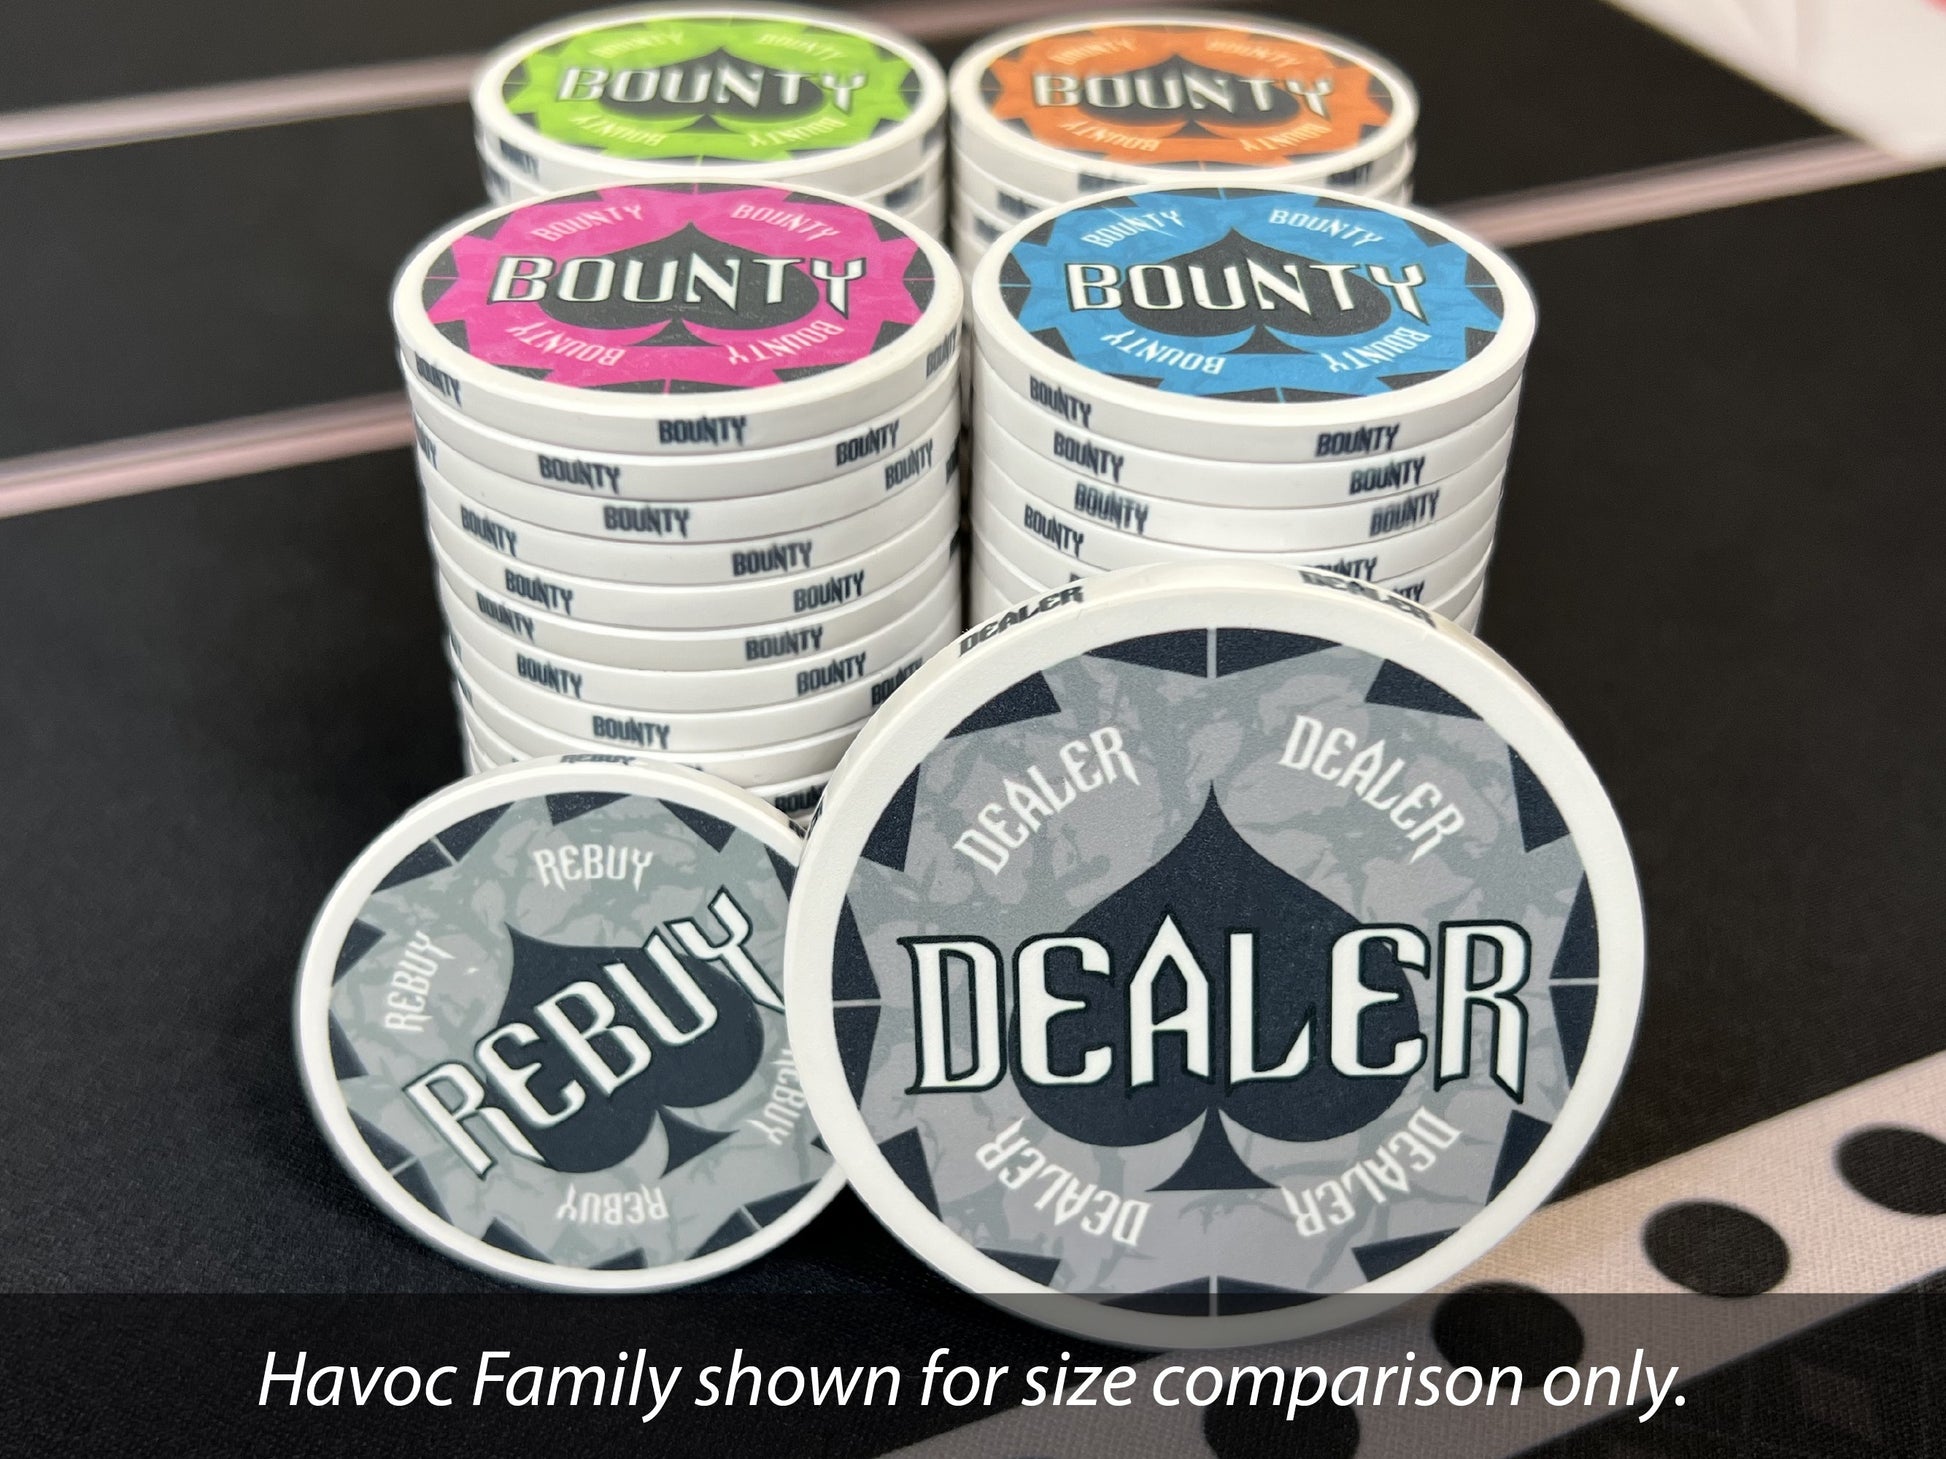 Also available for your Havoc Bounty Chips: matching dealer buttons and rebuy chips. Shown are the 43mm gray Havoc Rebuy Chip and the 60mm Ceramic Havoc Dealer Button. A 49mm dealer button is also available, but not shown